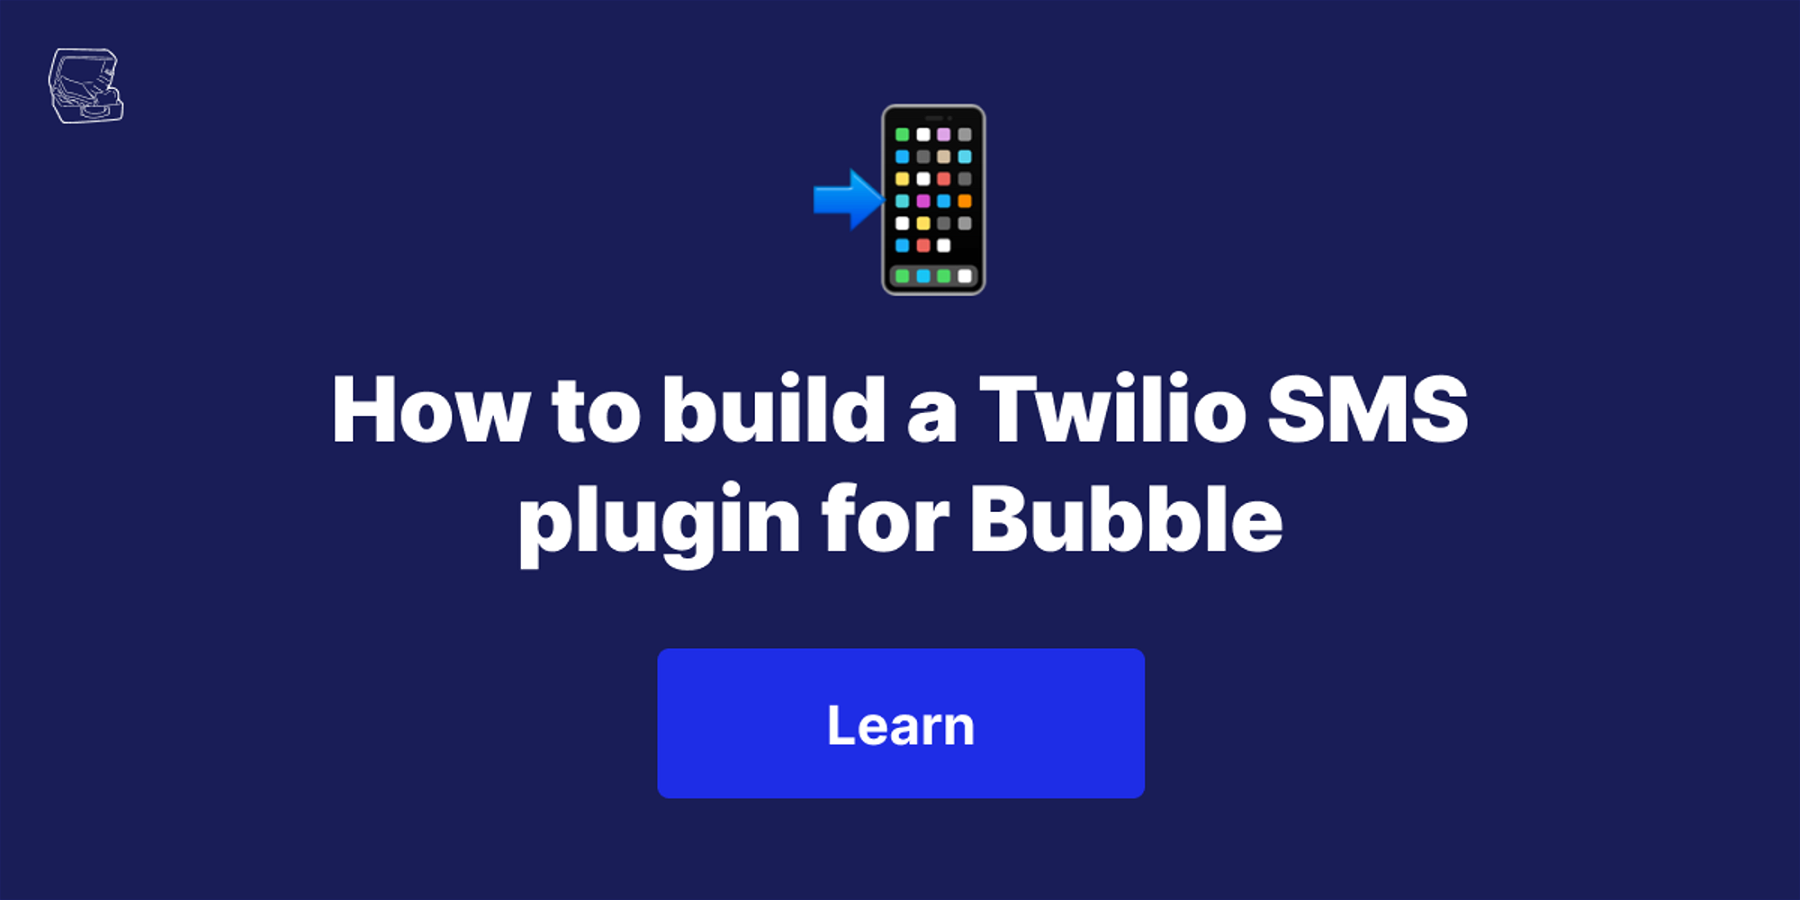 How to build a Twilio SMS plugin for Bubble